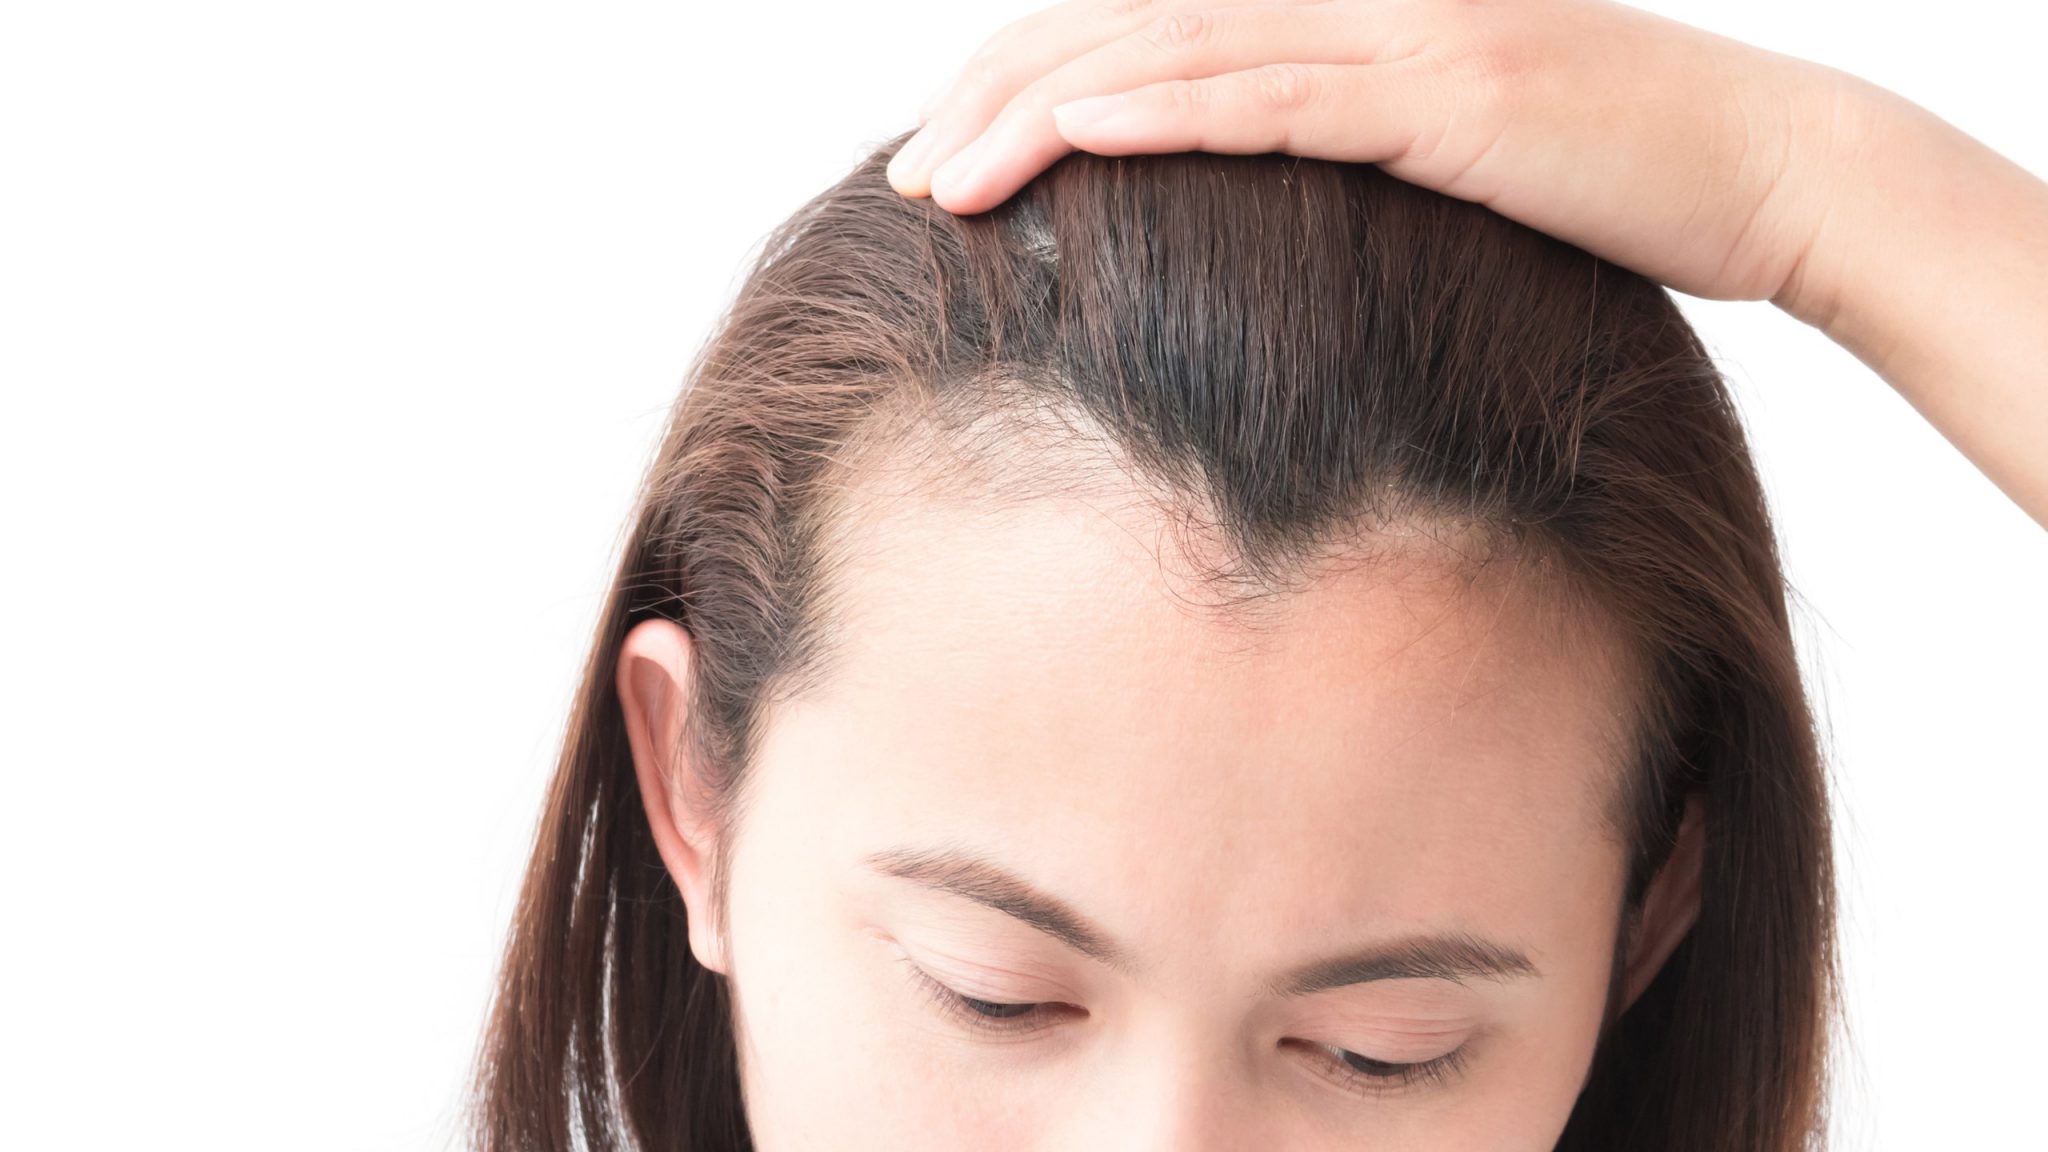 Tips to Prevent Hair Loss - My health beauty tips